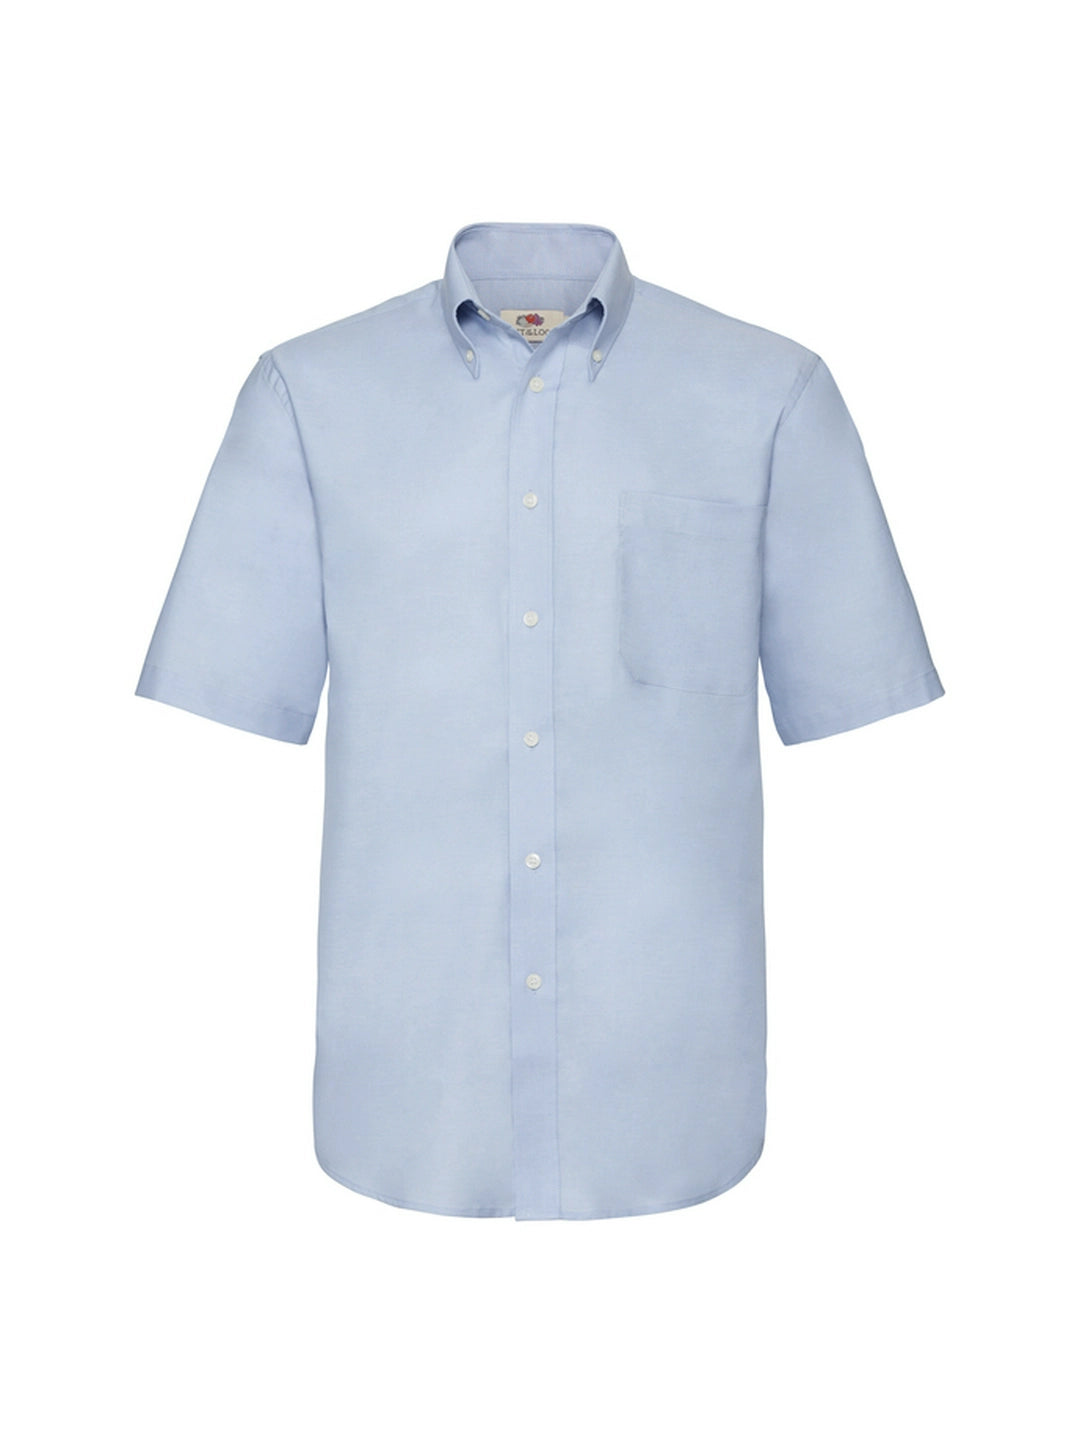 Fruit Of The Loom 65112 Mens Oxford Short Sleeve Shirt - COOZO